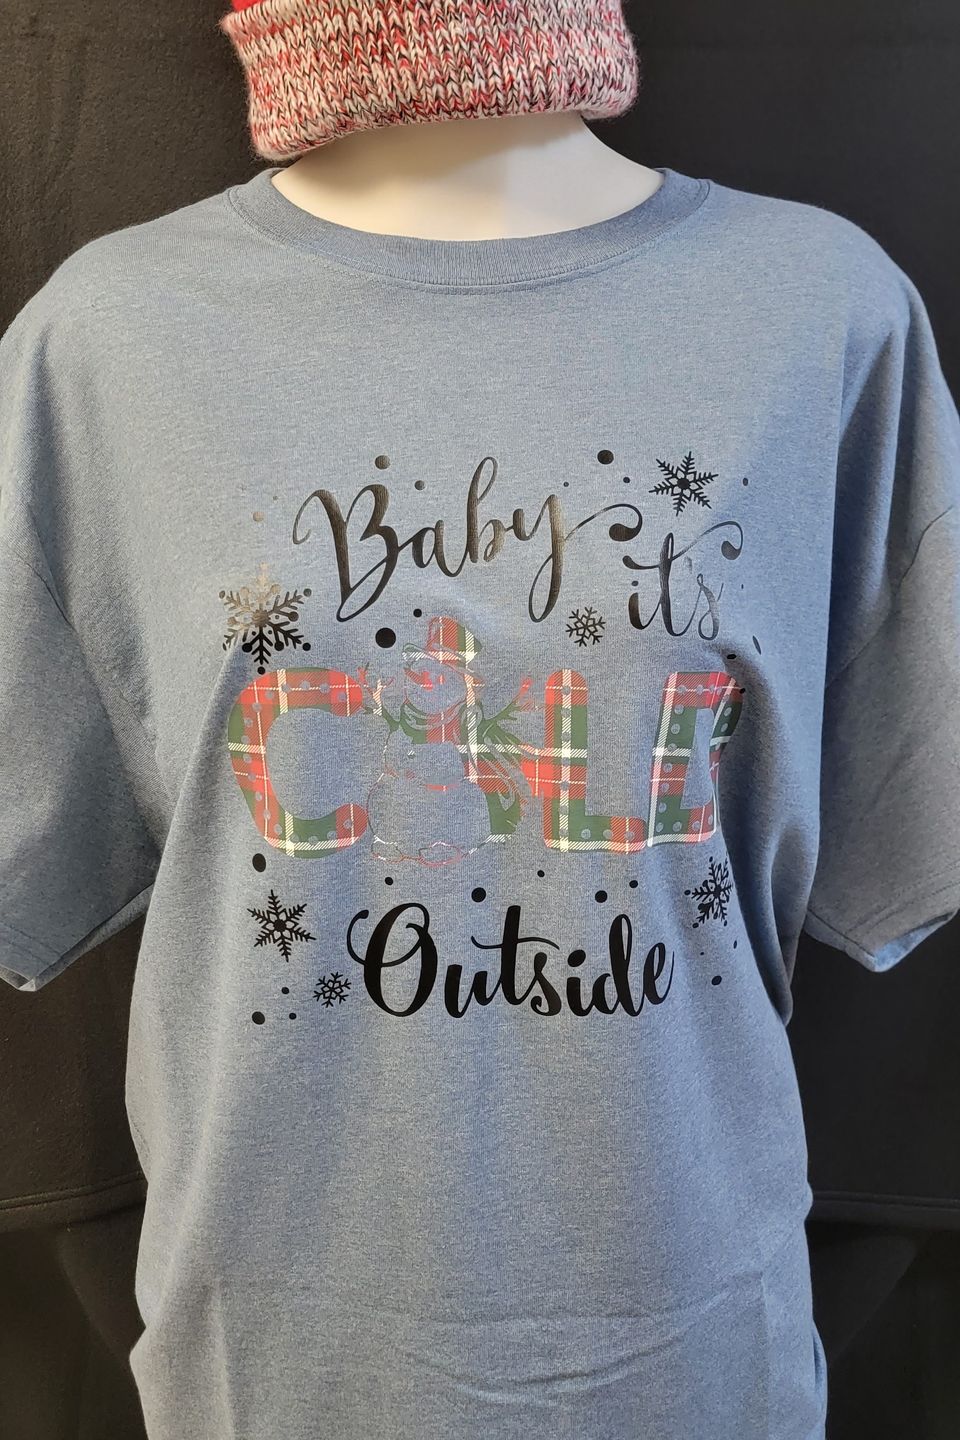 This t-shirt is an example of direct-to-film transfer (DTF) and has a design that says "Baby it's Cold Outside".